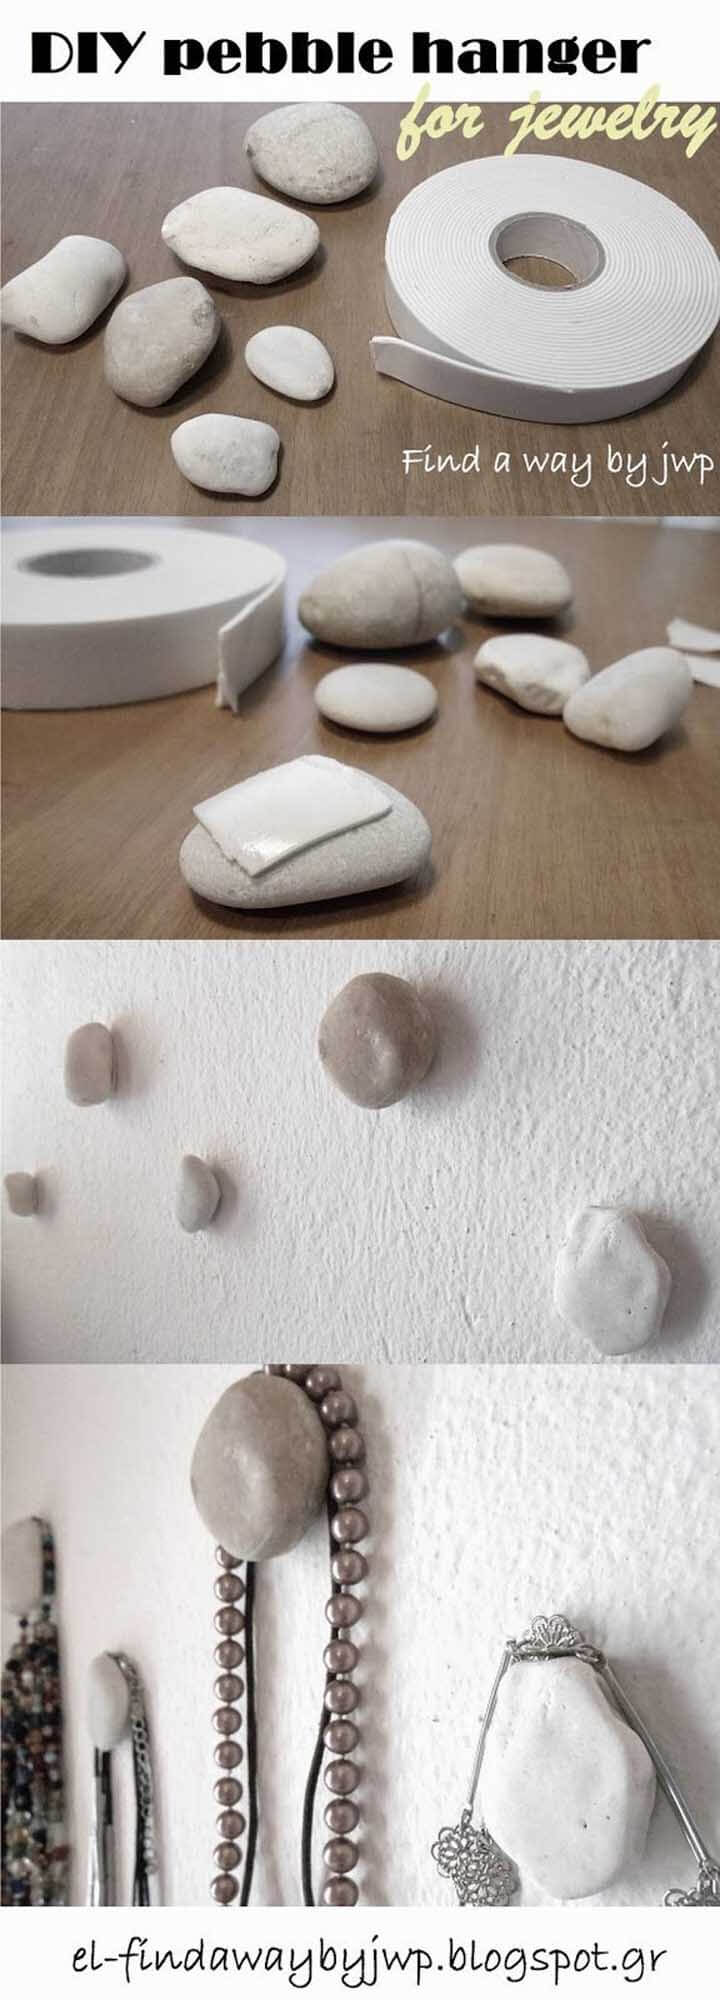 Pretty Wall-Mounted Pebble Necklace Knobs